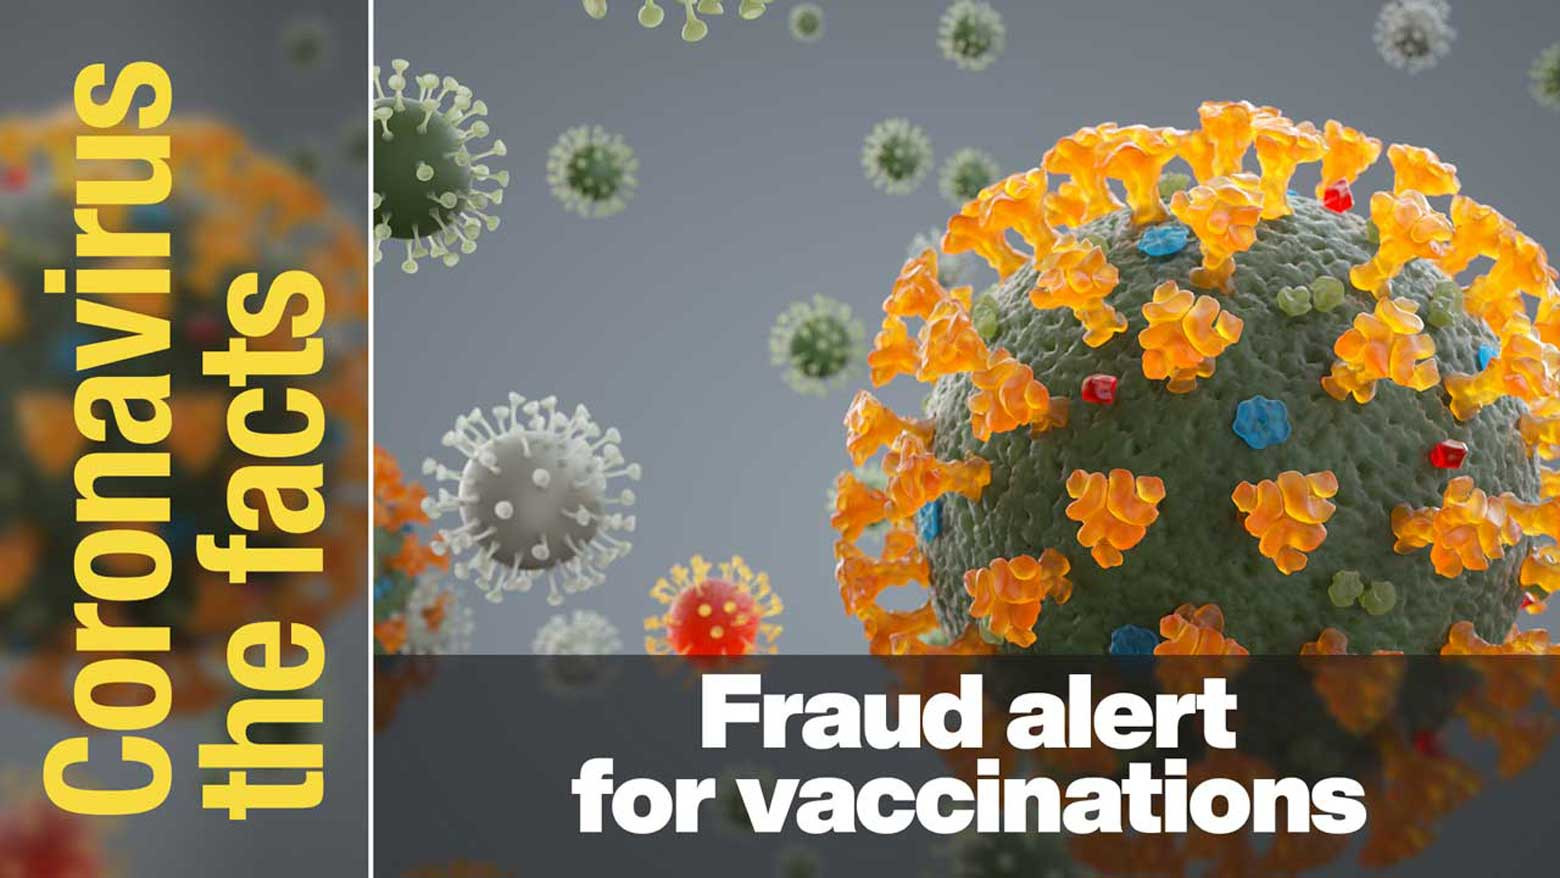 Authorities issue vaccination scam warnings